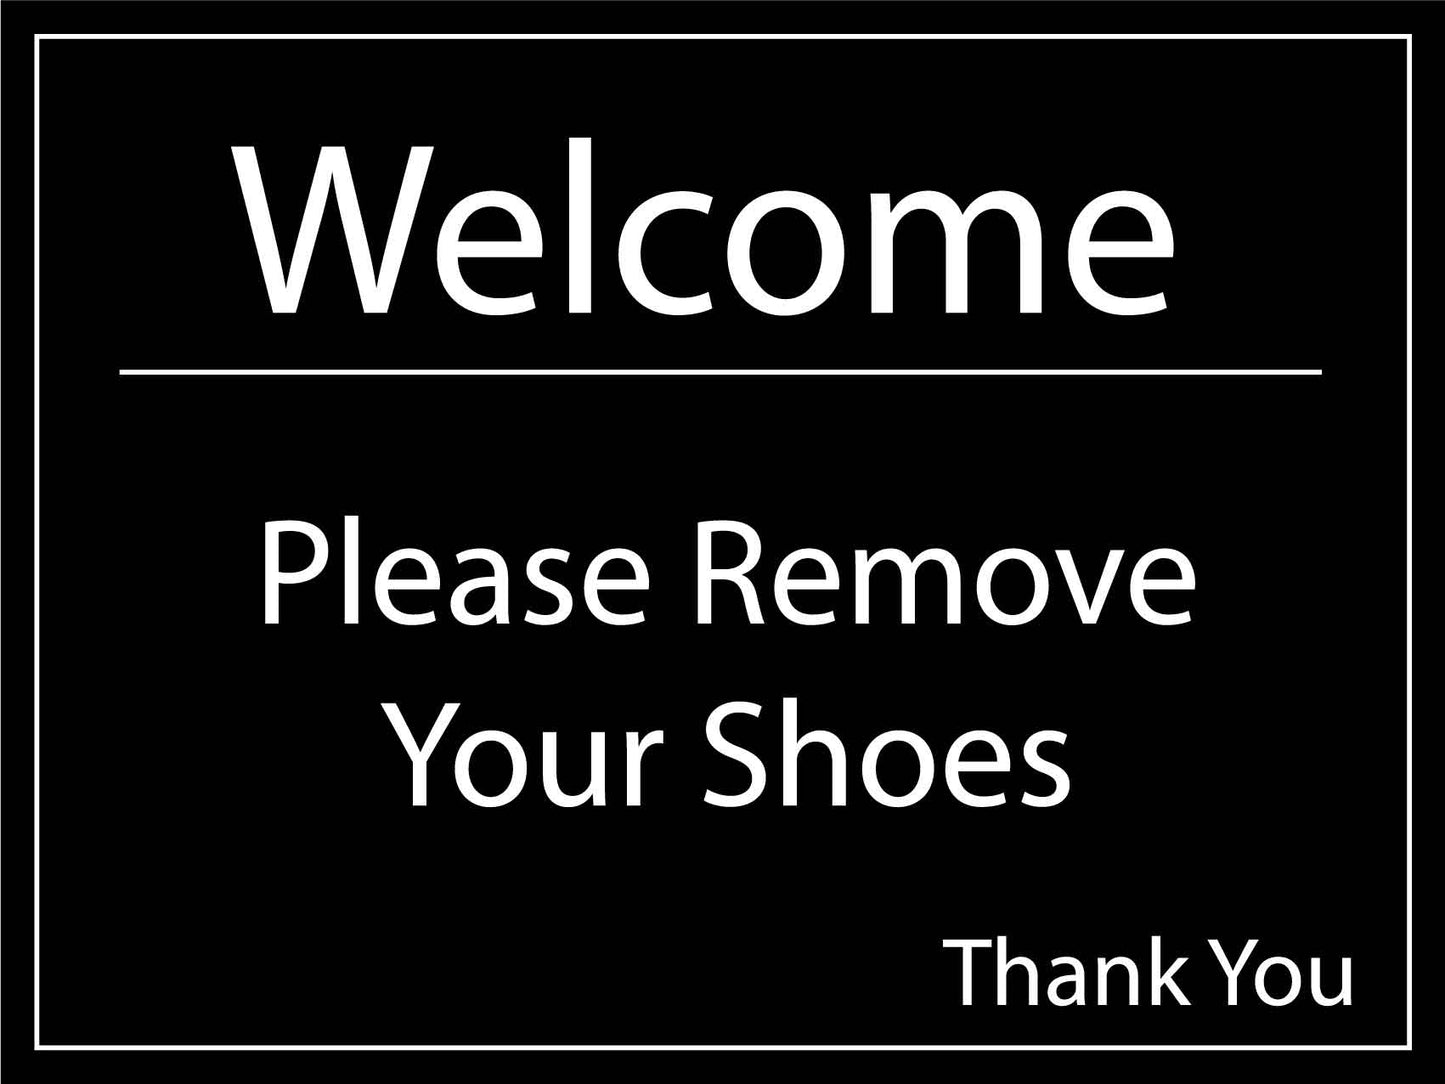 Welcome Please Remove Your Shoes Sign